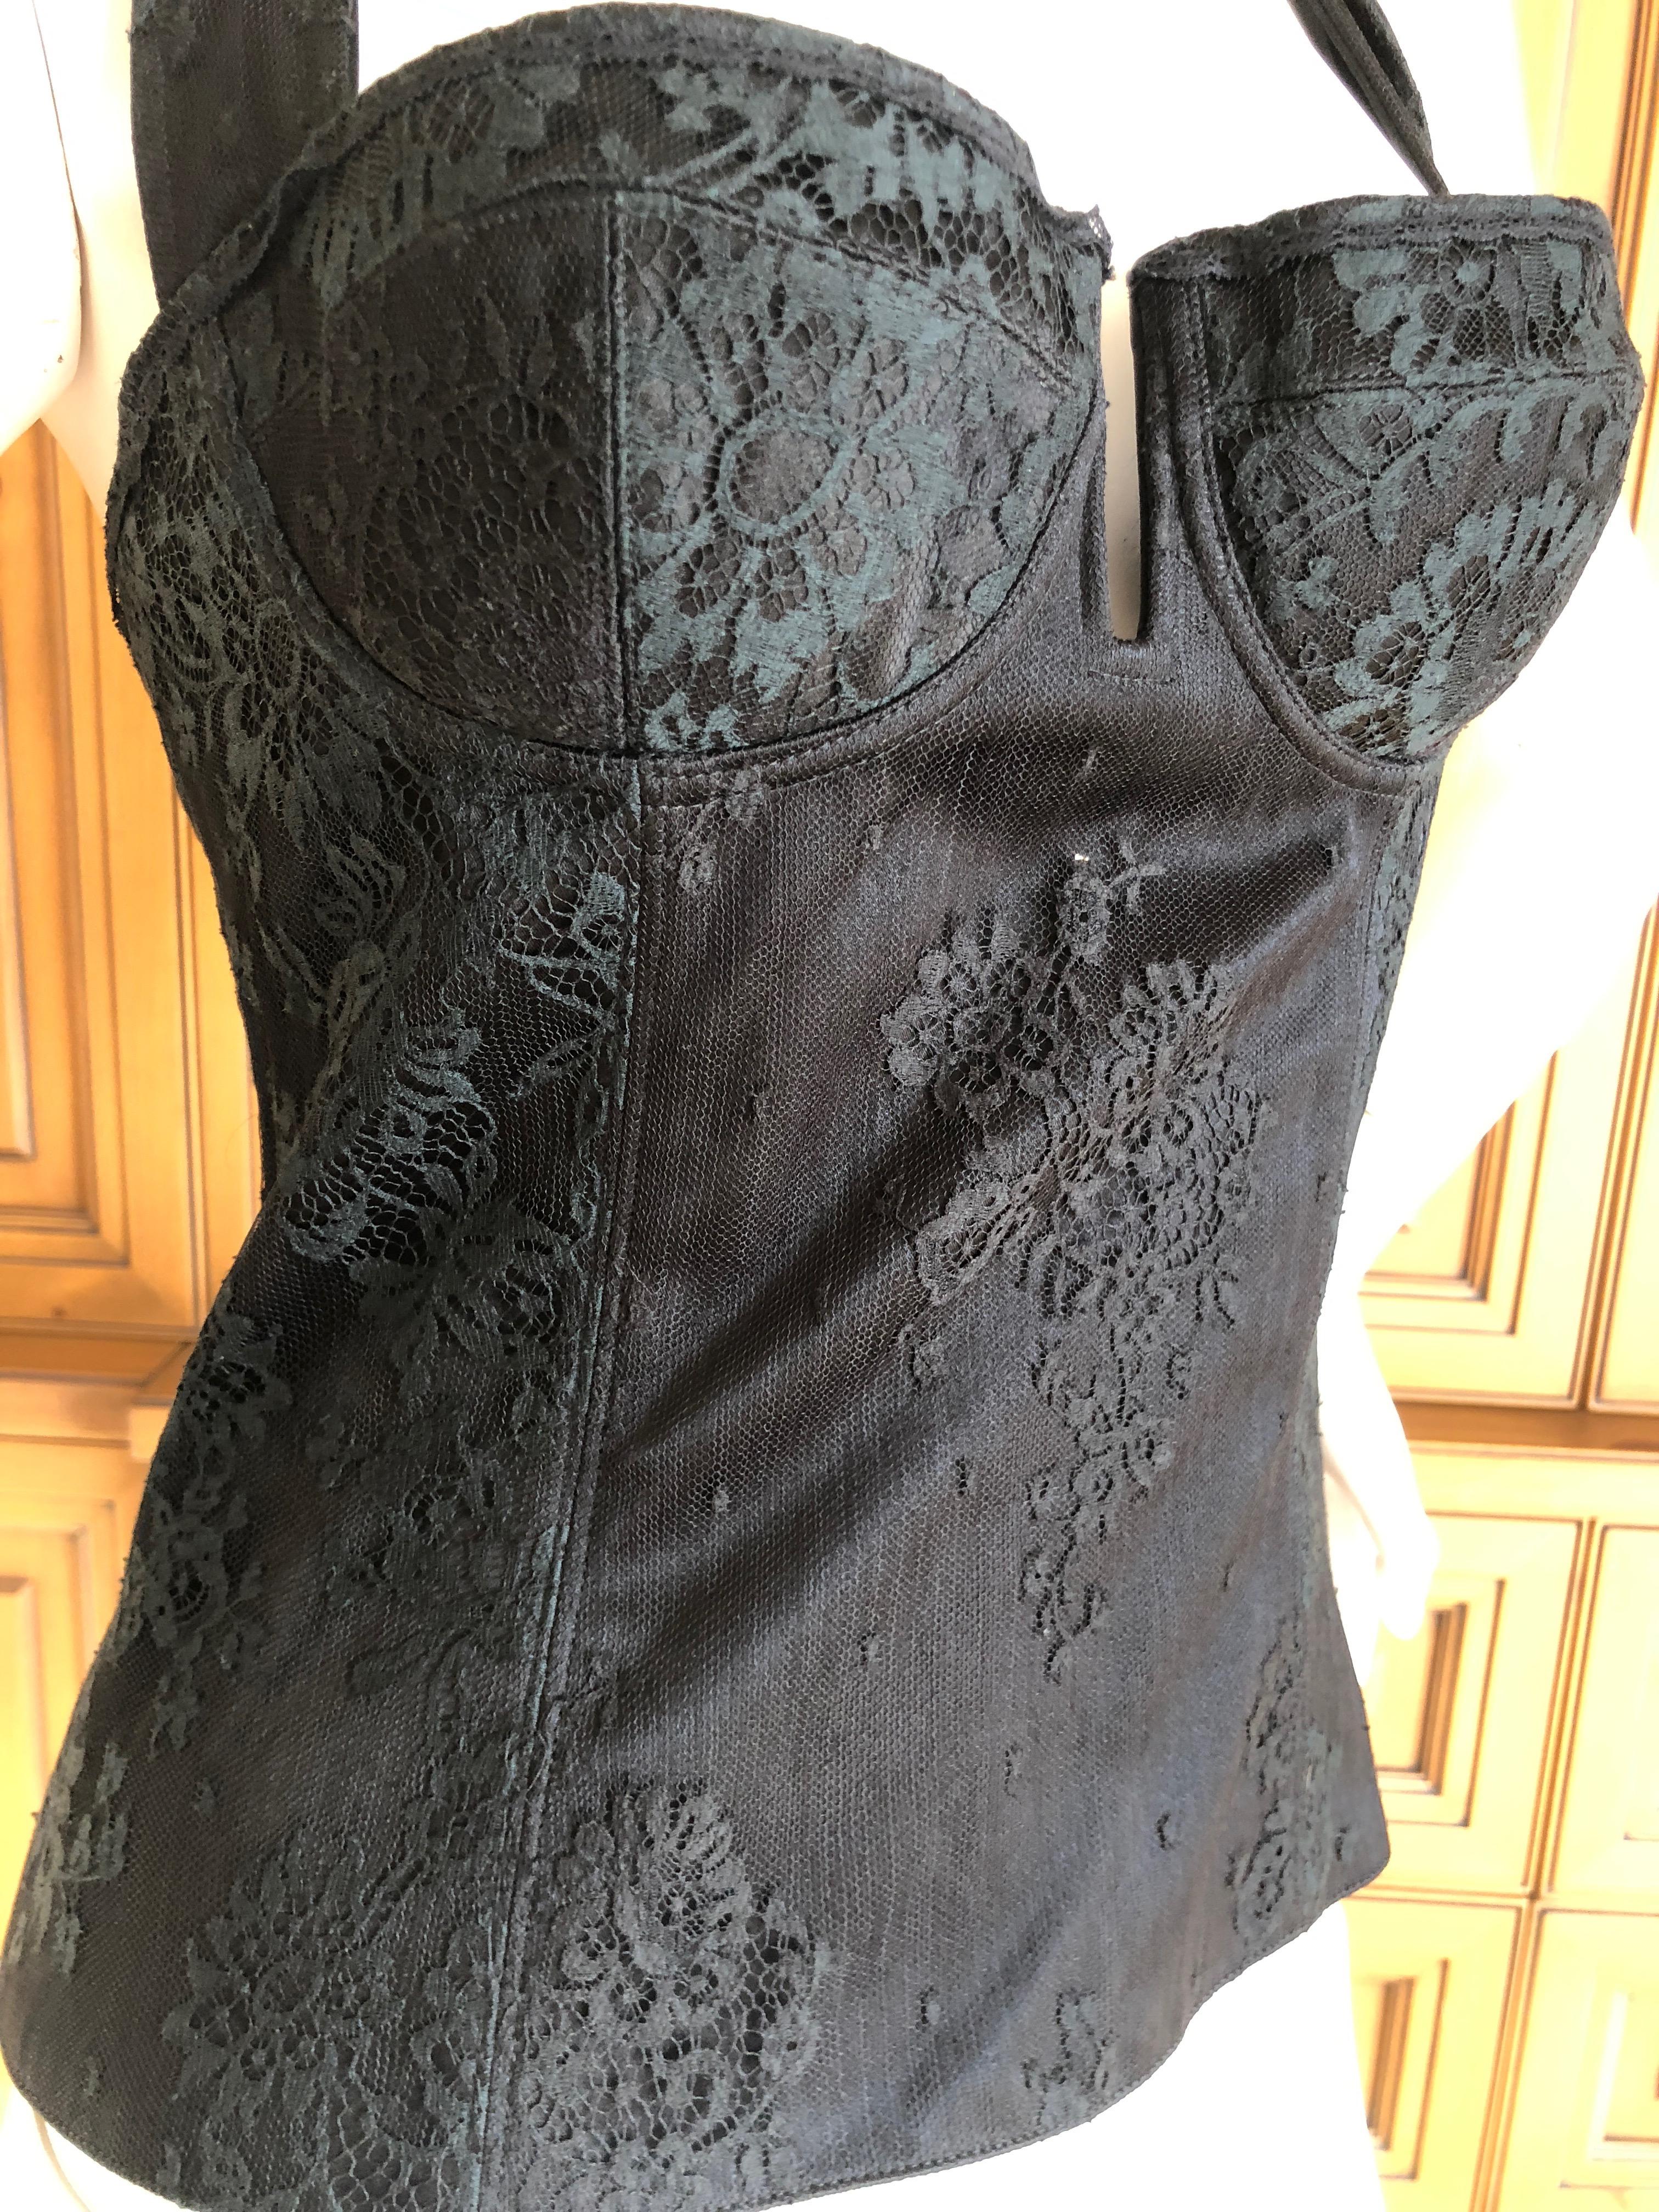 Christian Dior by John Galliano Vintage Black Lace Corset NWT Size 38 In New Condition For Sale In Cloverdale, CA